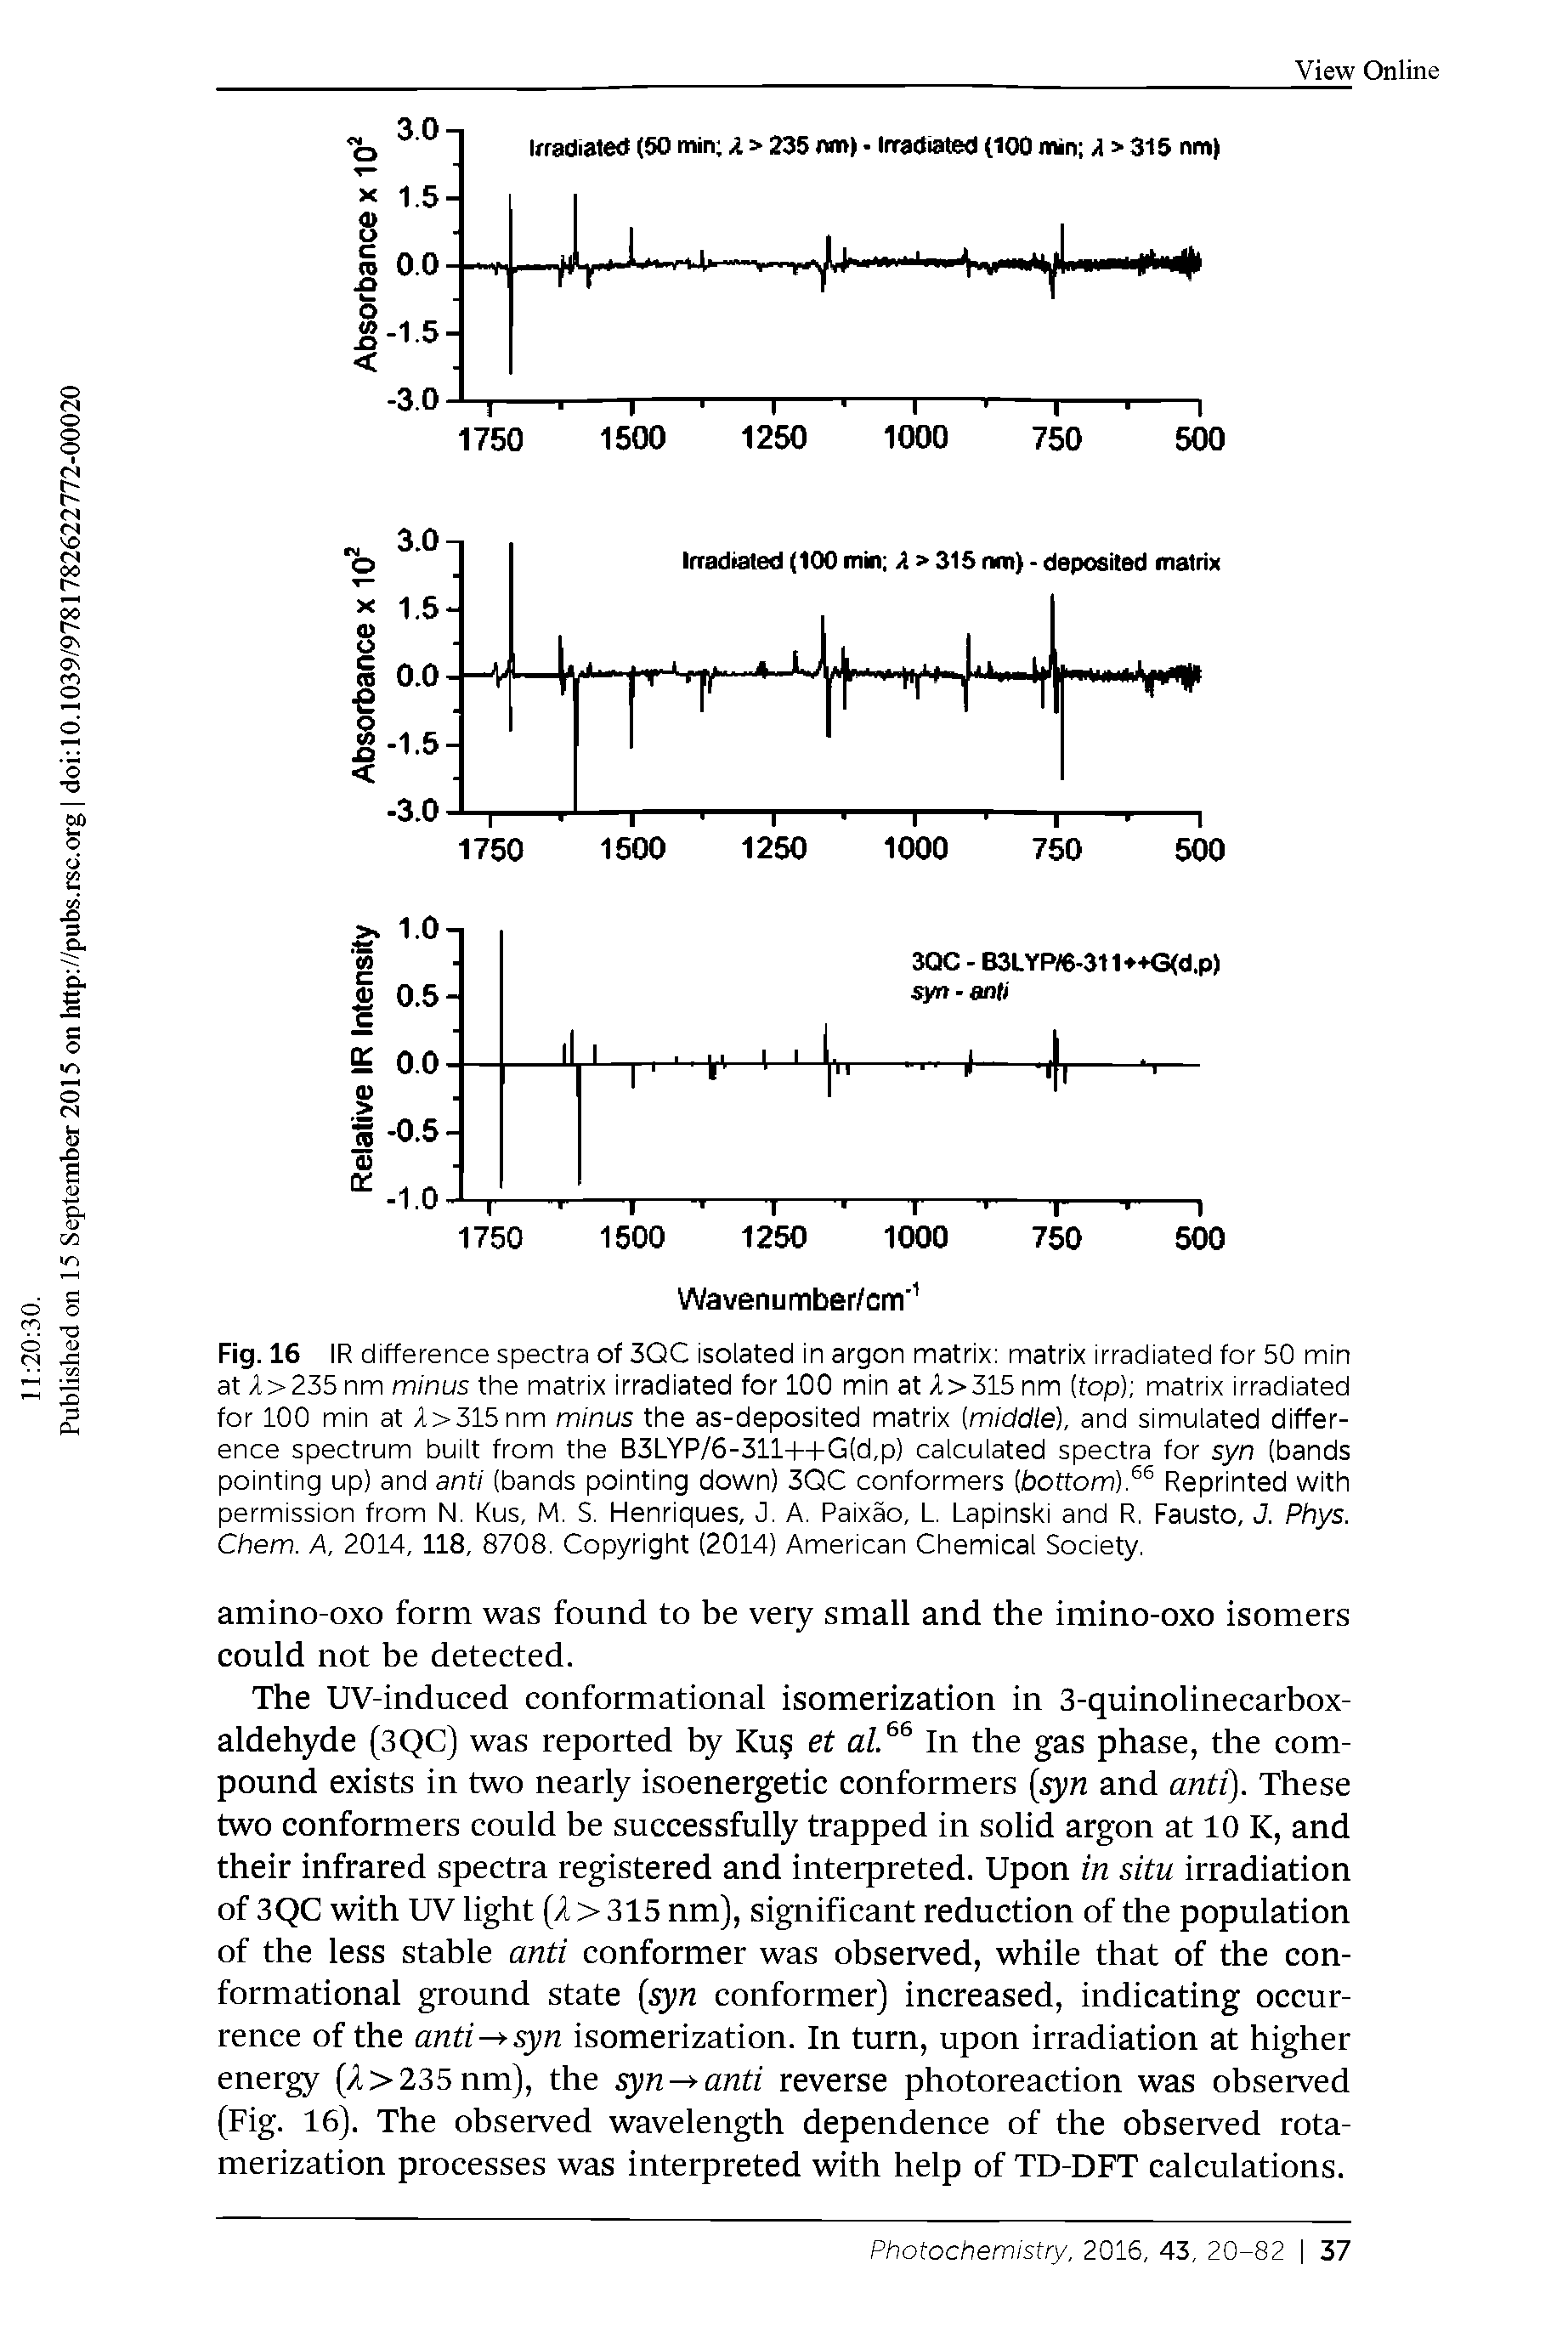 Fig. 16 IR difference spectra of 3QC isolated in argon matrix matrix irradiated for 50 min at A>235 nm minus the matrix irradiated for 100 min at A>315 nm (top) matrix irradiated for 100 min at l>315nm minus the as-deposited matrix (middle), and simulated difference spectrum built from the B3LYP/6-311- - -G(d,p) calculated spectra for syn (bands pointing up) and anti (bands pointing down) 3QC conformers (bottom). " " Reprinted with permission from N. Kus, M. S. Henriques, J. A. Paixao, L. Lapinski and R. Fausto, J. Phys. Chem. A, 2014, 118, 8708. Copyright (2014) American Chemical Society.